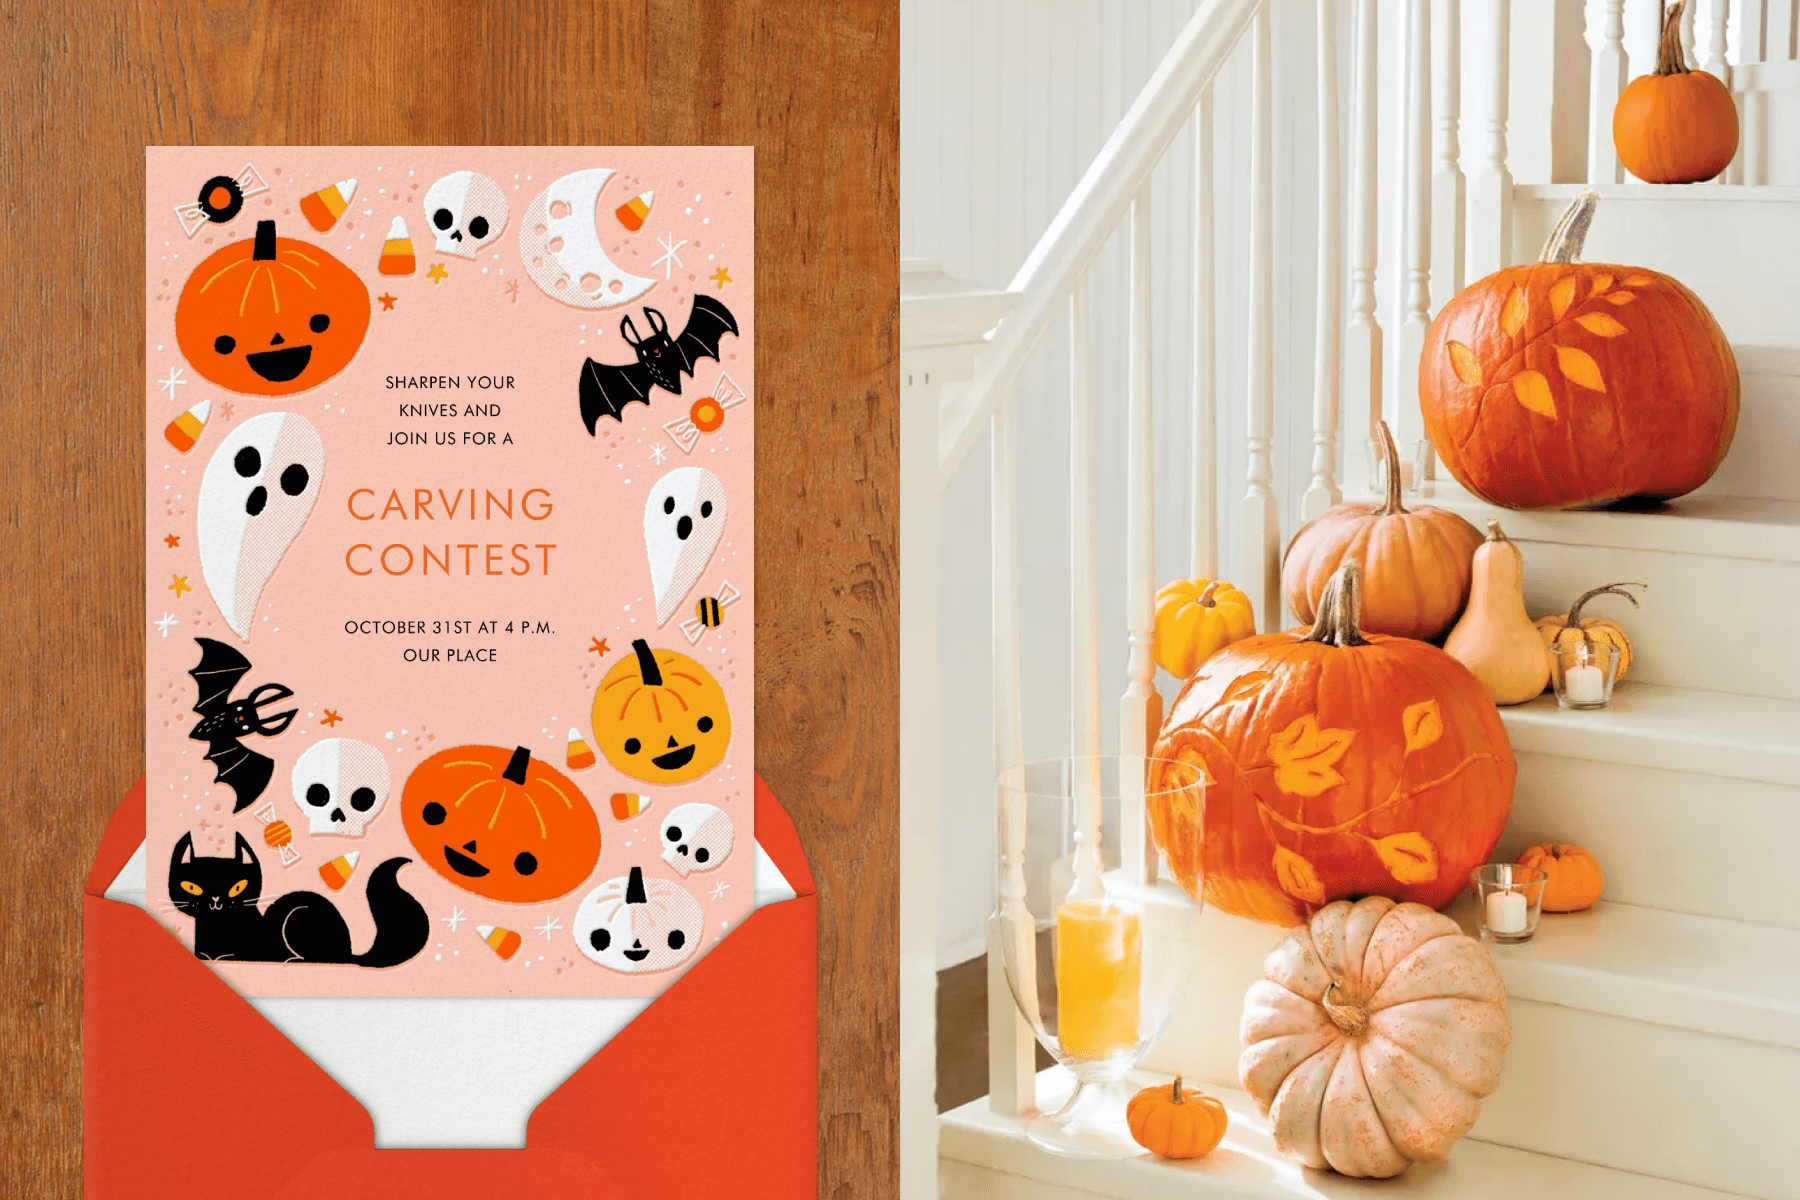 Left: A pumpkin carving contest invitation with a pink background and a border formed by pumpkins, skulls, ghosts, bays, and a black cat. Right: Sophisticated carved pumpkins and gourds line a white staircase.